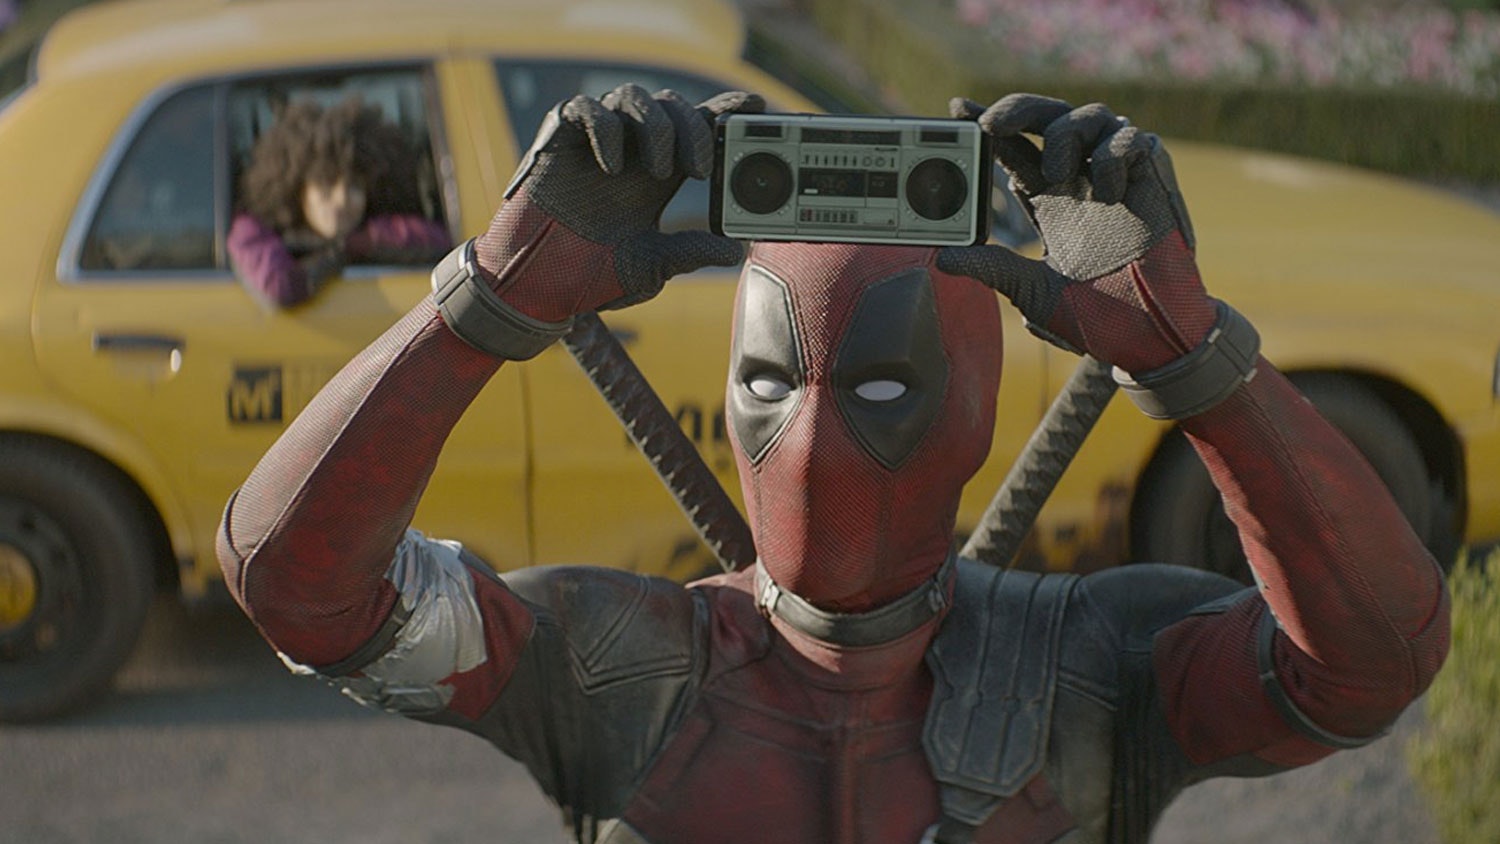 Ryan Reynolds on Why 'Deadpool' Nearly Gave Him a Nervous